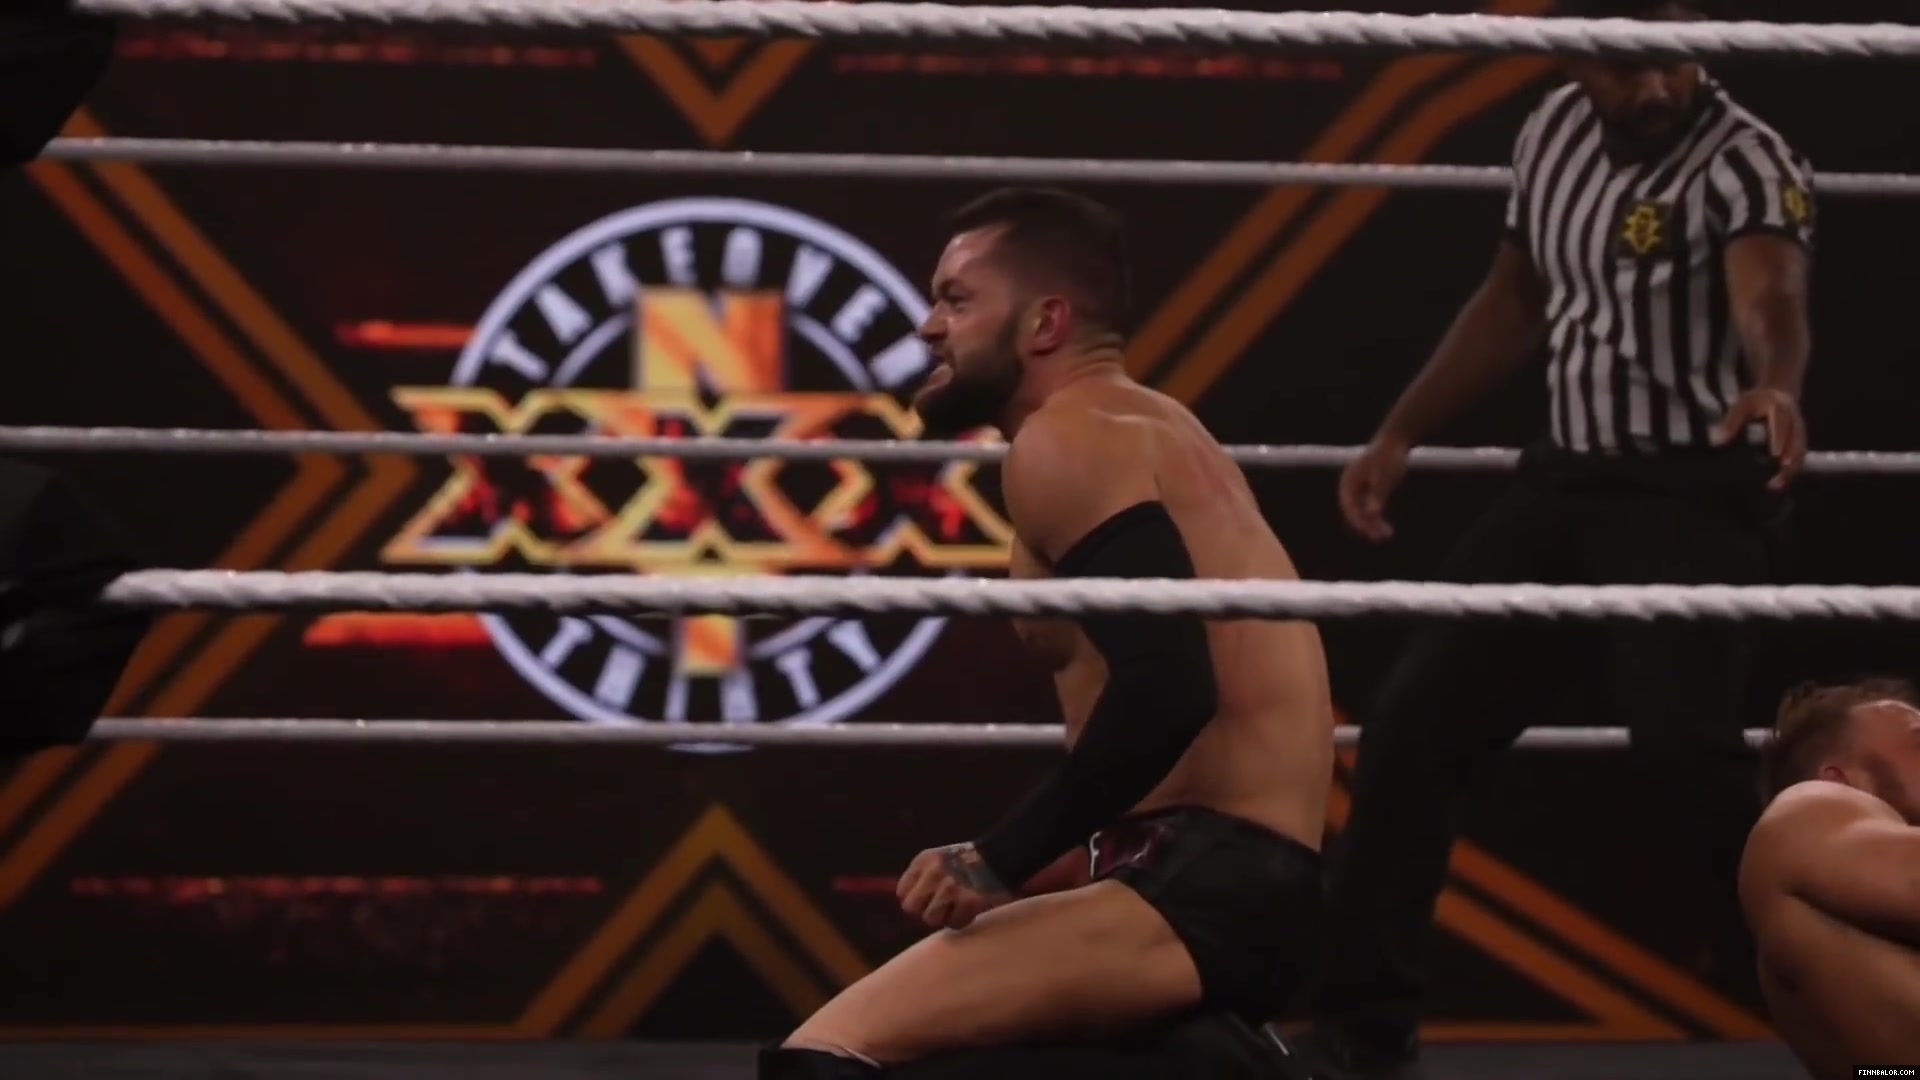 Finn_Balor___The_Rising_of_the_Prince_in_NXT_567.jpg